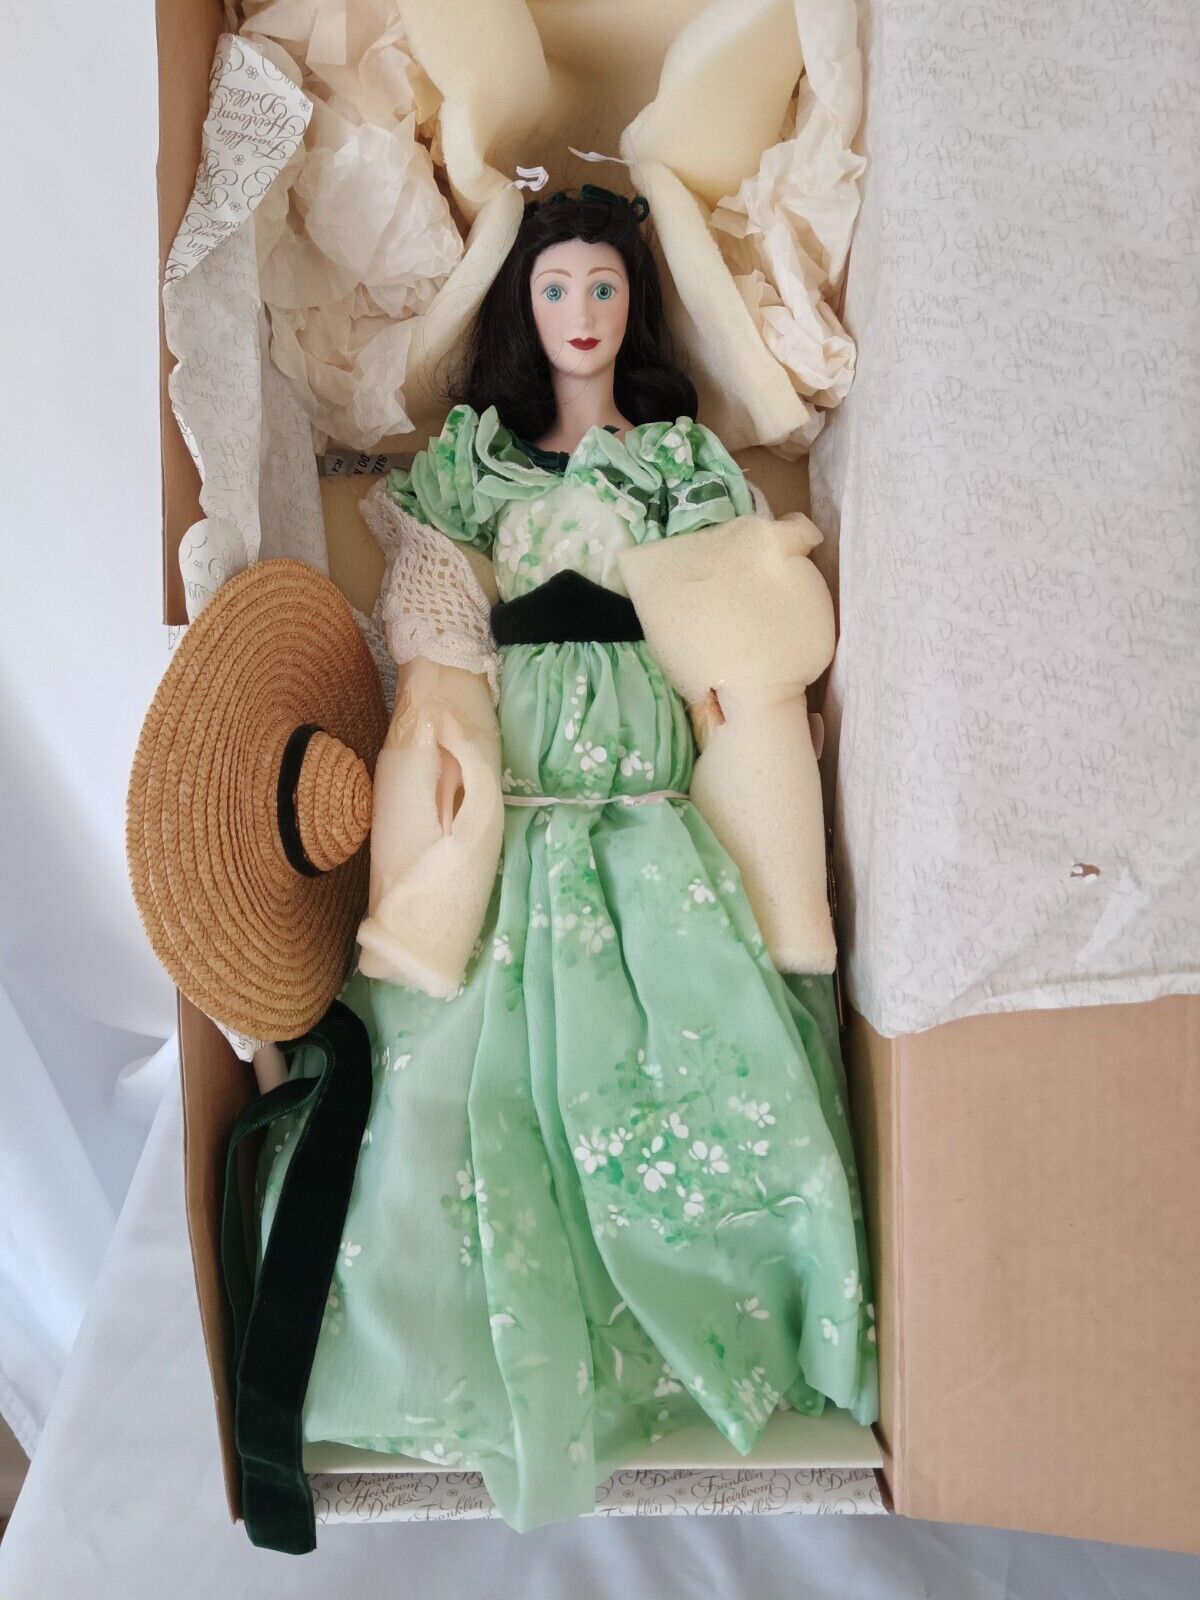 Vintage Franklin Mint Heirloom Doll Scarlett Gone With The Wind Still in OB - $80.00